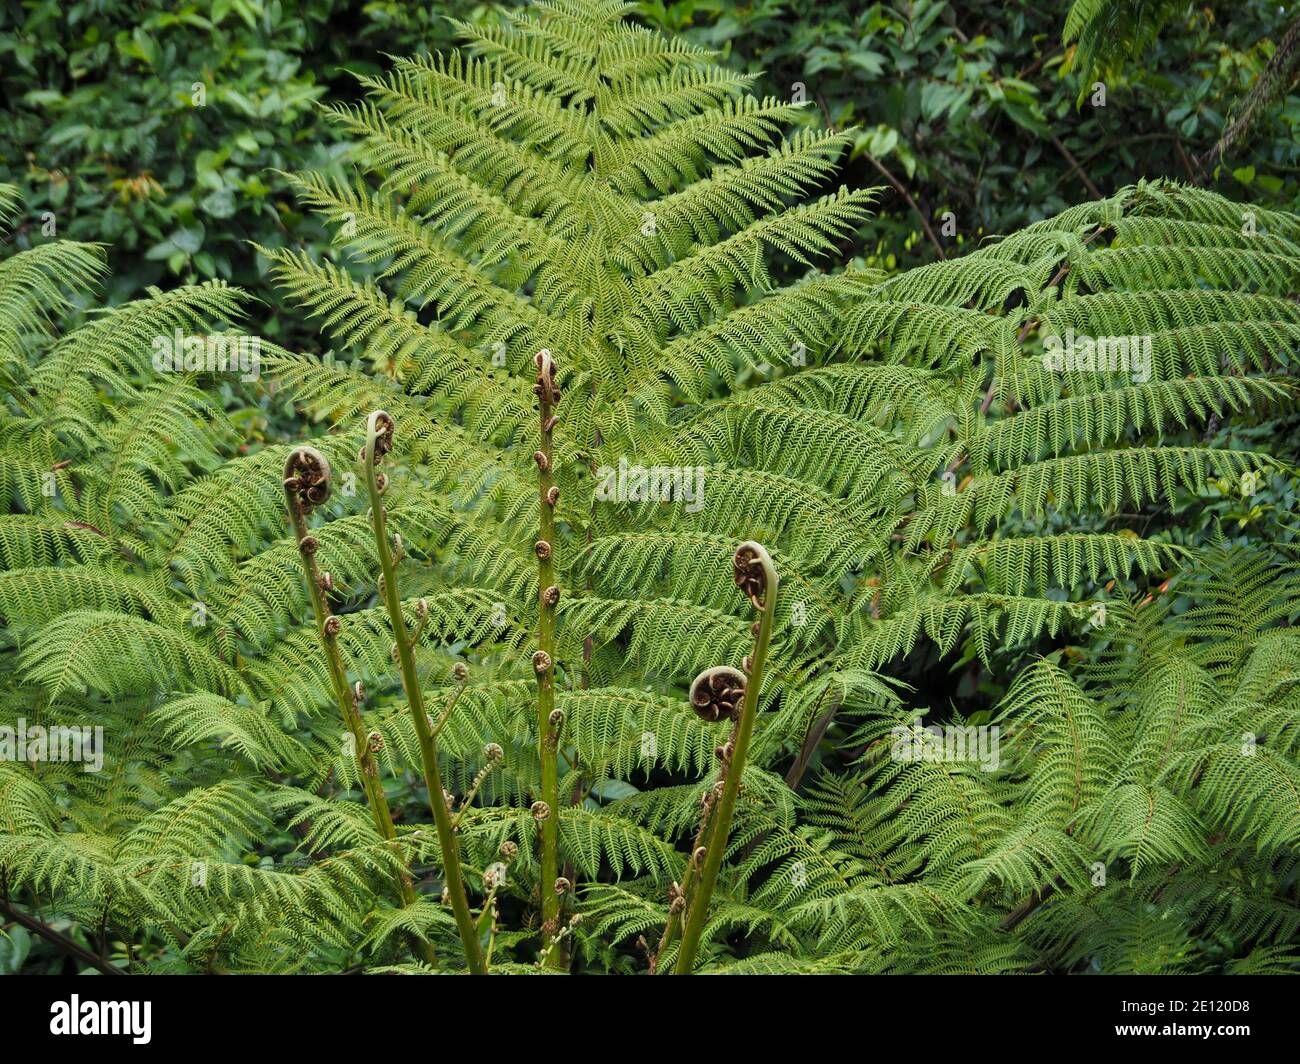 Large bushy Australian tree fern with new spiral fronds emerging from the centre Stock Photo